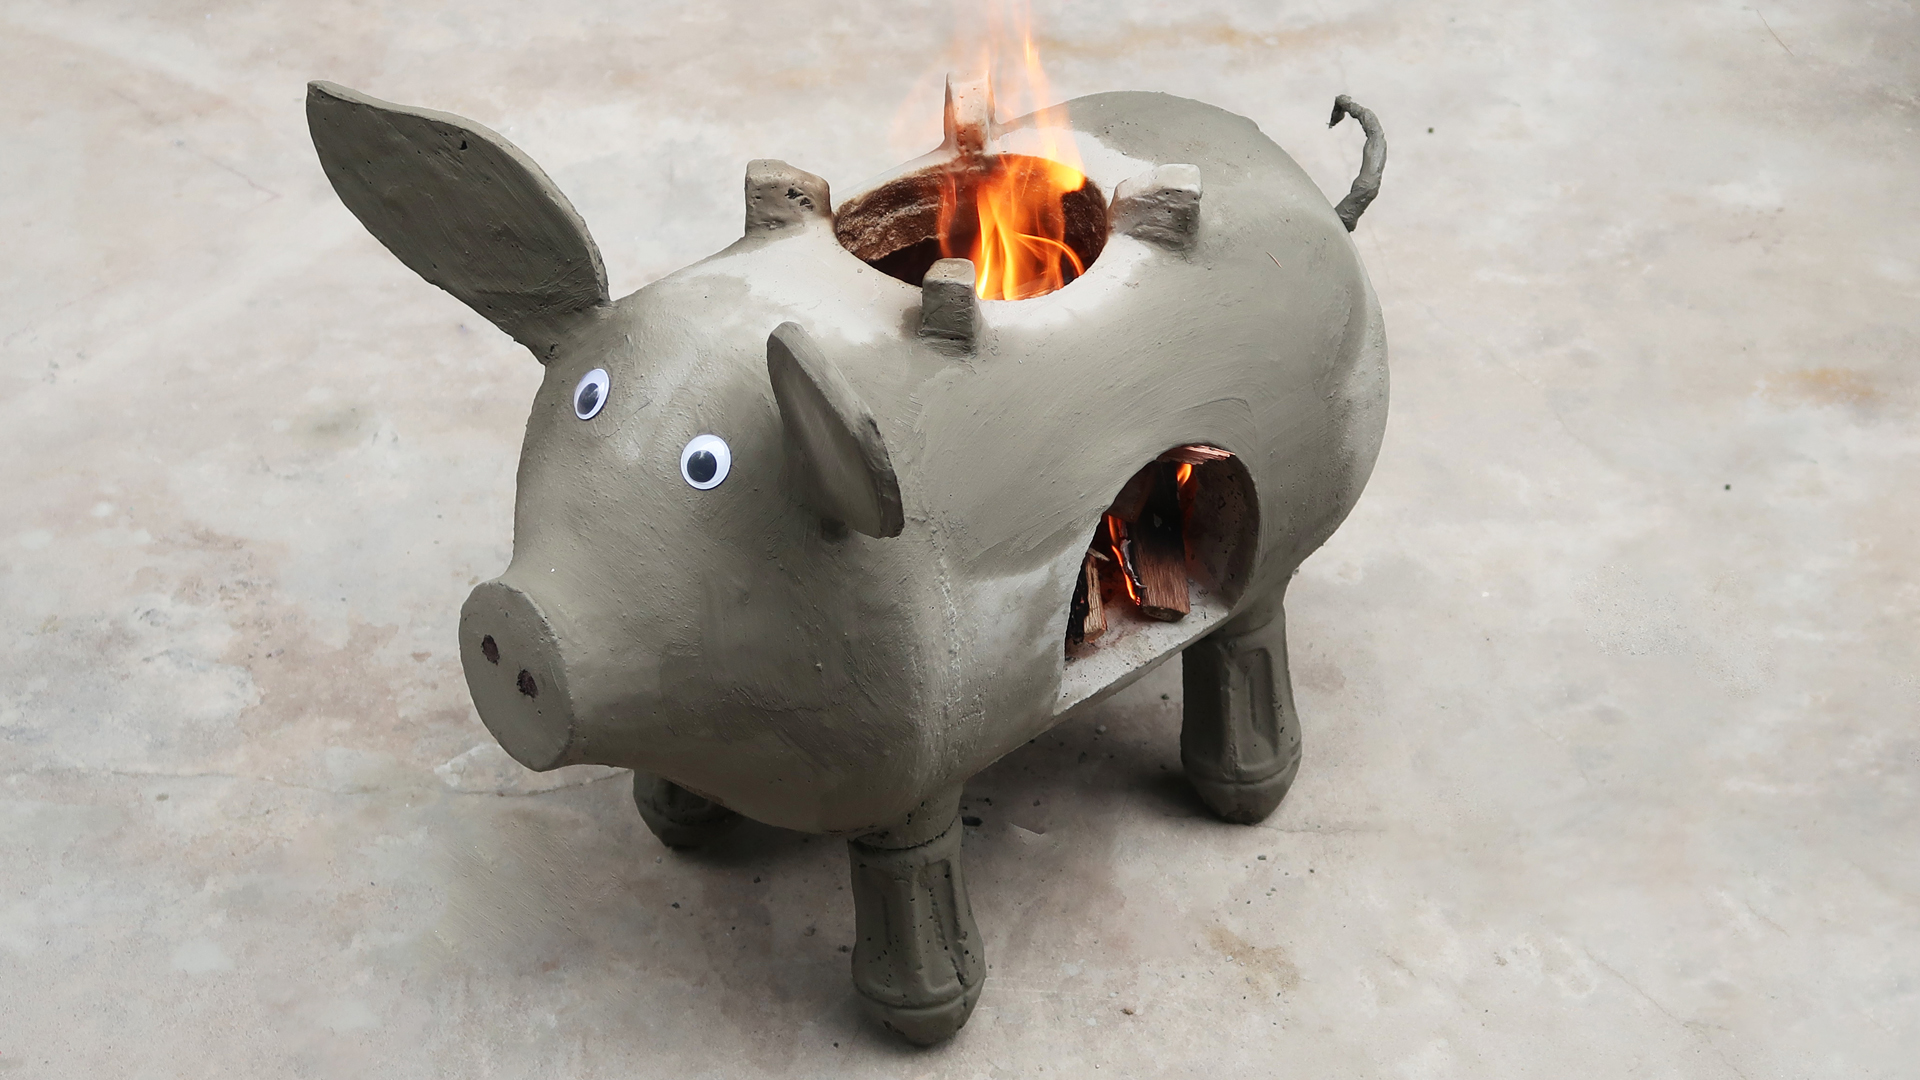 DIY Cement Stove Making At Home, Amazing Piggy Kitchen Construction Ideas